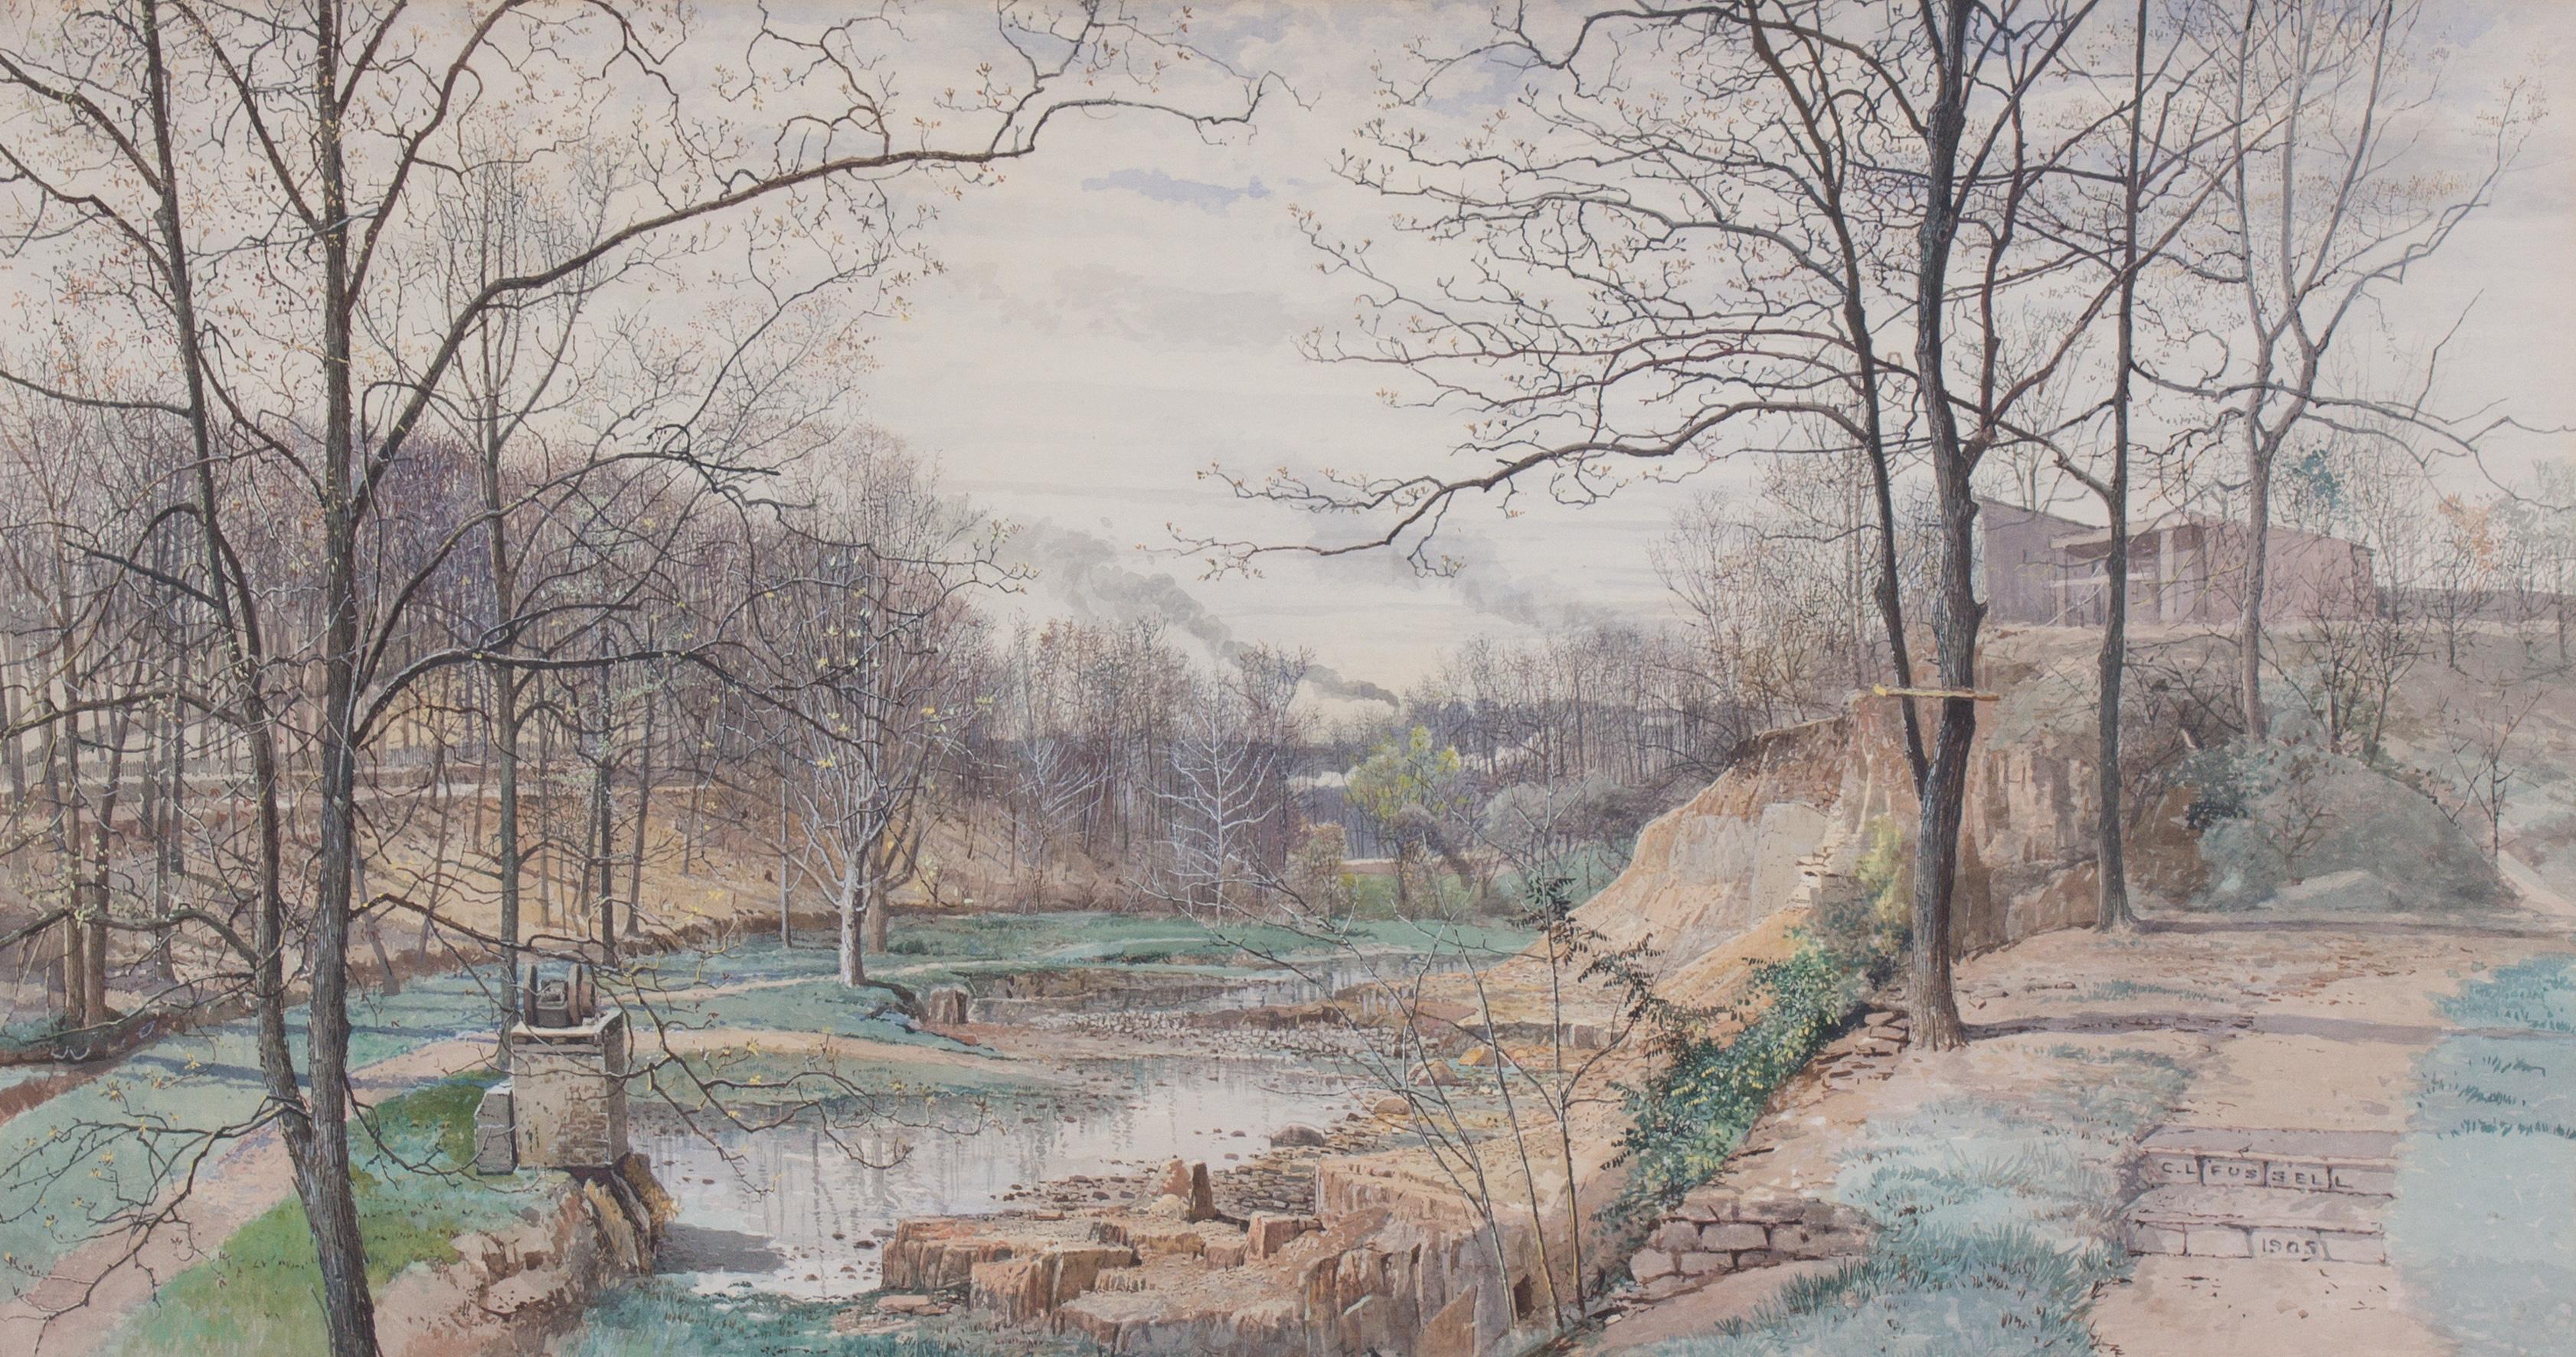 Watercolor View from Gayley Street, Media Pennsylvania, 1905 - Art by Charles Lewis Fussell